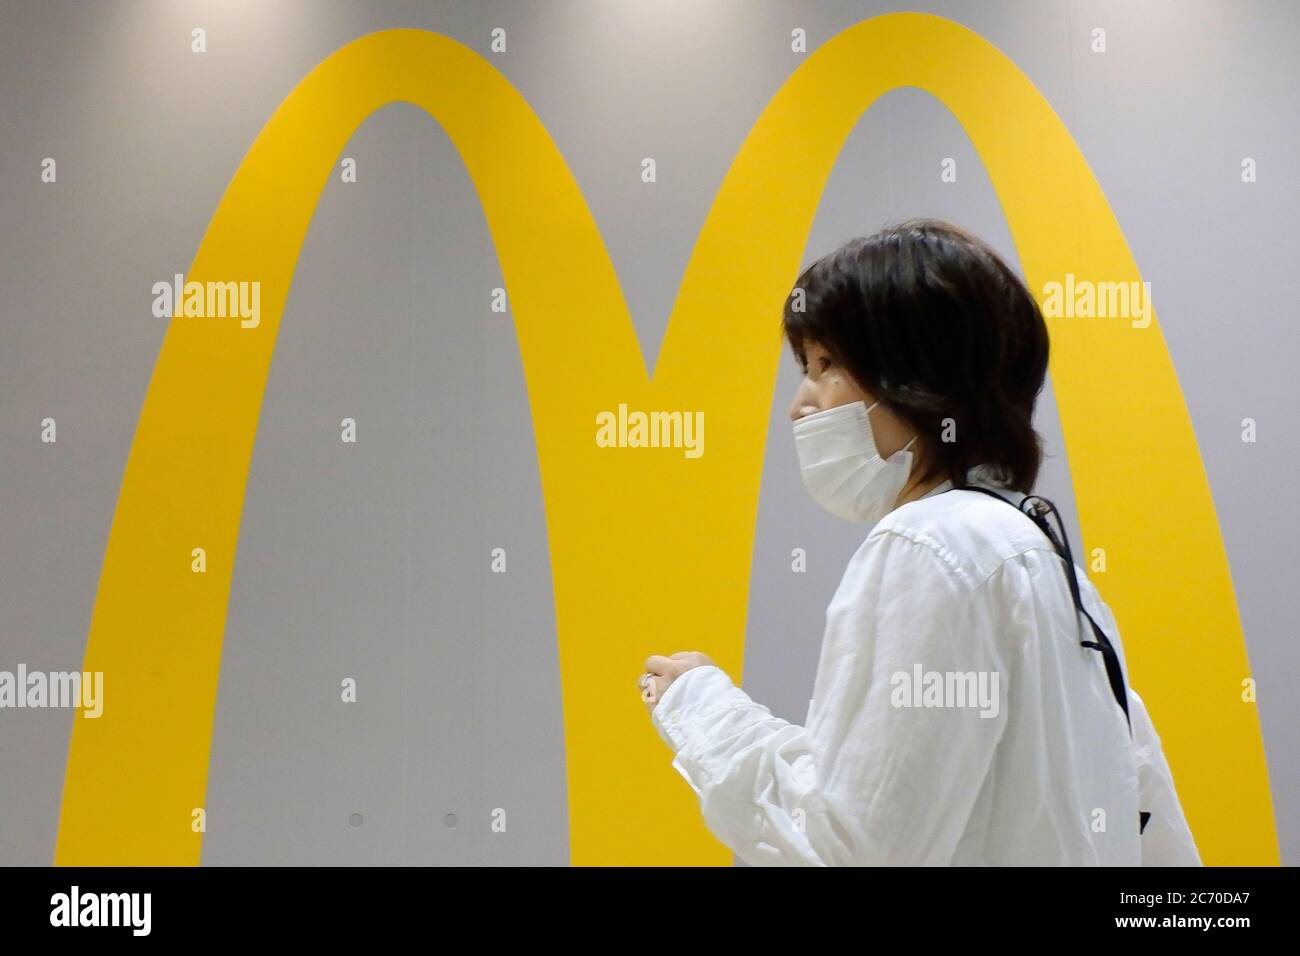 A woman wearing a protective face mask walks past a McDonald's store at a shopping district amid the coronavirus (COVID-19) outbreak.Tokyo on Monday reported 119 new coronavirus infections, falling below 200 for the first time in five days, Tokyo Gov. Yuriko Koike said. Stock Photo